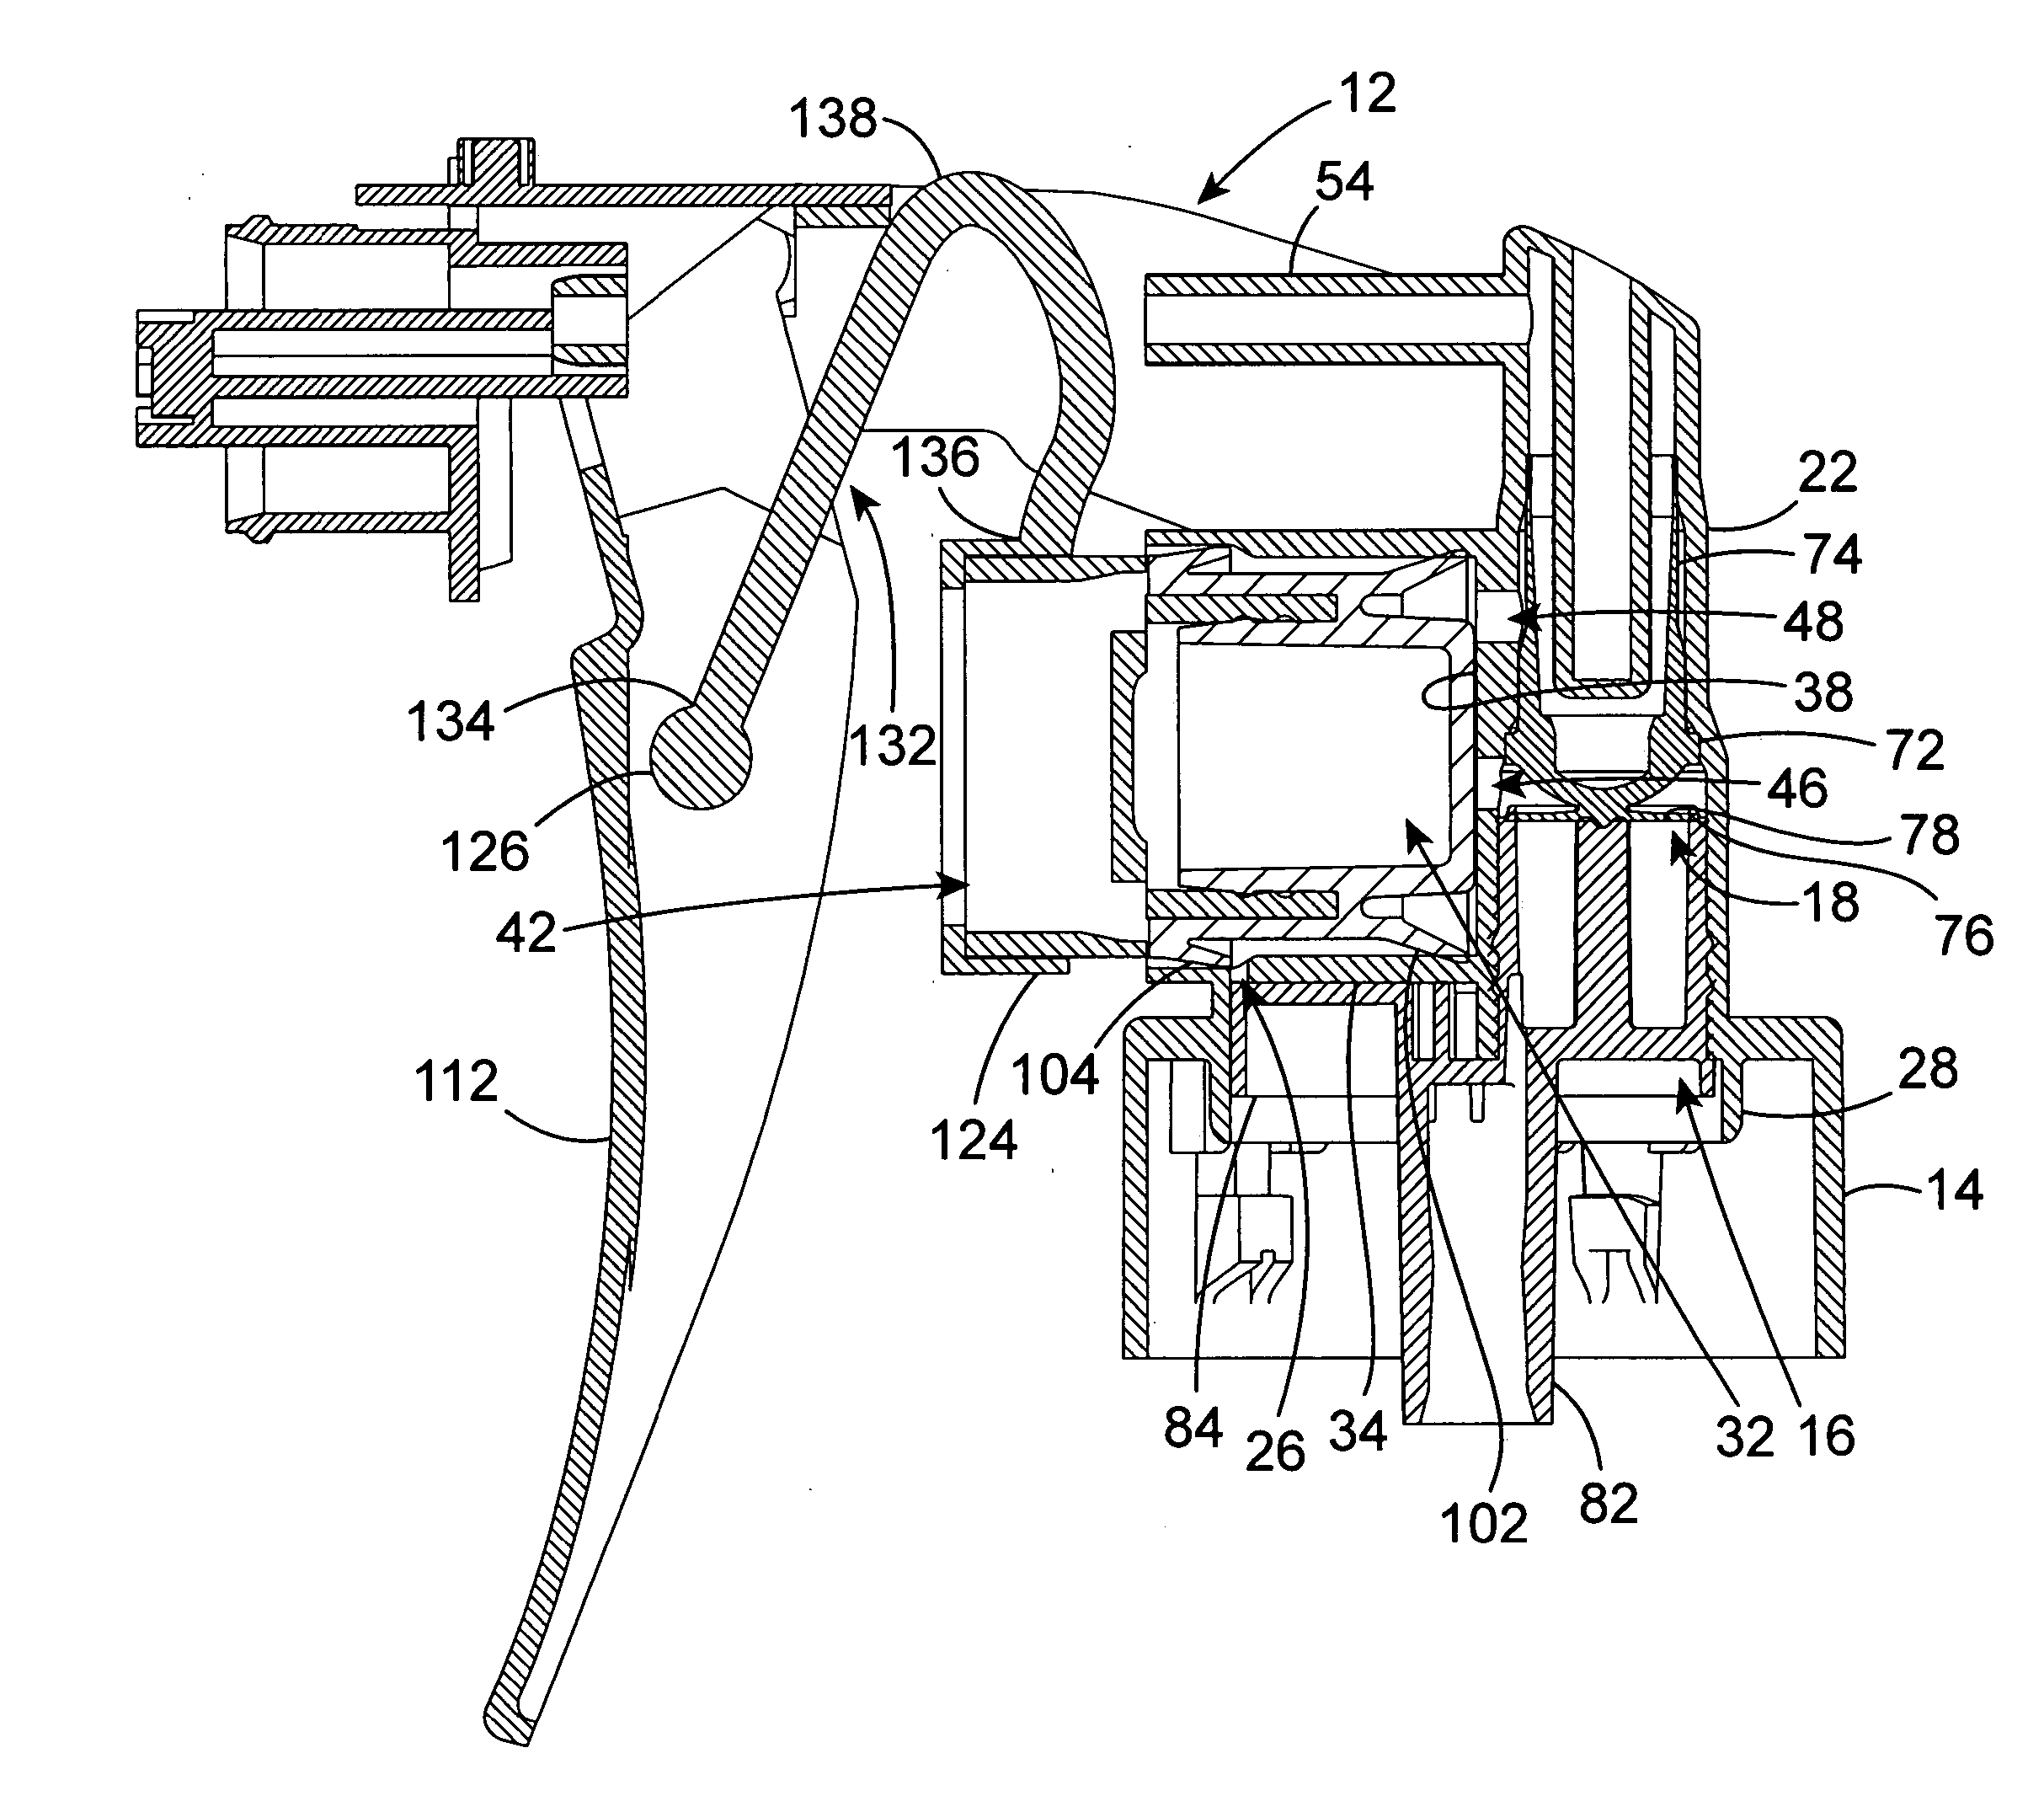 Trigger sprayer with integral piston rod and u-shaped spring